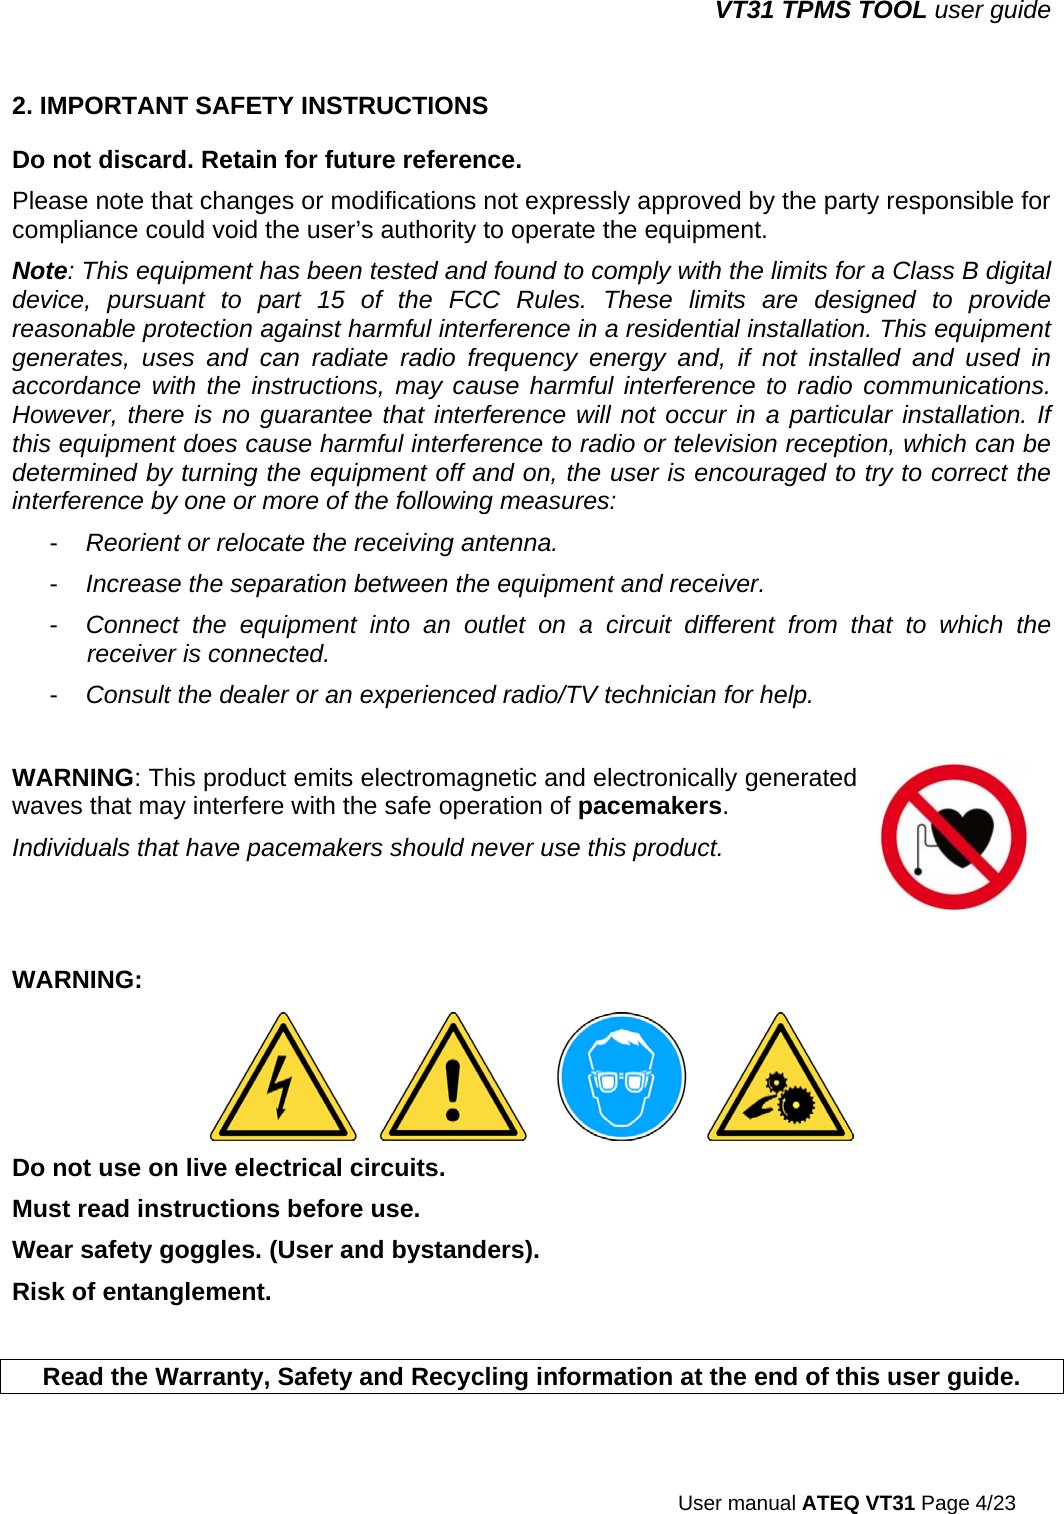 VT31 TPMS TOOL user guide  User manual ATEQ VT31 Page 4/23 2. IMPORTANT SAFETY INSTRUCTIONS Do not discard. Retain for future reference. Please note that changes or modifications not expressly approved by the party responsible for compliance could void the user’s authority to operate the equipment. Note: This equipment has been tested and found to comply with the limits for a Class B digital device, pursuant to part 15 of the FCC Rules. These limits are designed to provide reasonable protection against harmful interference in a residential installation. This equipment generates, uses and can radiate radio frequency energy and, if not installed and used in accordance with the instructions, may cause harmful interference to radio communications. However, there is no guarantee that interference will not occur in a particular installation. If this equipment does cause harmful interference to radio or television reception, which can be determined by turning the equipment off and on, the user is encouraged to try to correct the interference by one or more of the following measures: -  Reorient or relocate the receiving antenna. -  Increase the separation between the equipment and receiver. -  Connect the equipment into an outlet on a circuit different from that to which the receiver is connected. -  Consult the dealer or an experienced radio/TV technician for help.  WARNING: This product emits electromagnetic and electronically generated waves that may interfere with the safe operation of pacemakers. Individuals that have pacemakers should never use this product.  WARNING:   Do not use on live electrical circuits. Must read instructions before use. Wear safety goggles. (User and bystanders). Risk of entanglement.   Read the Warranty, Safety and Recycling information at the end of this user guide. 